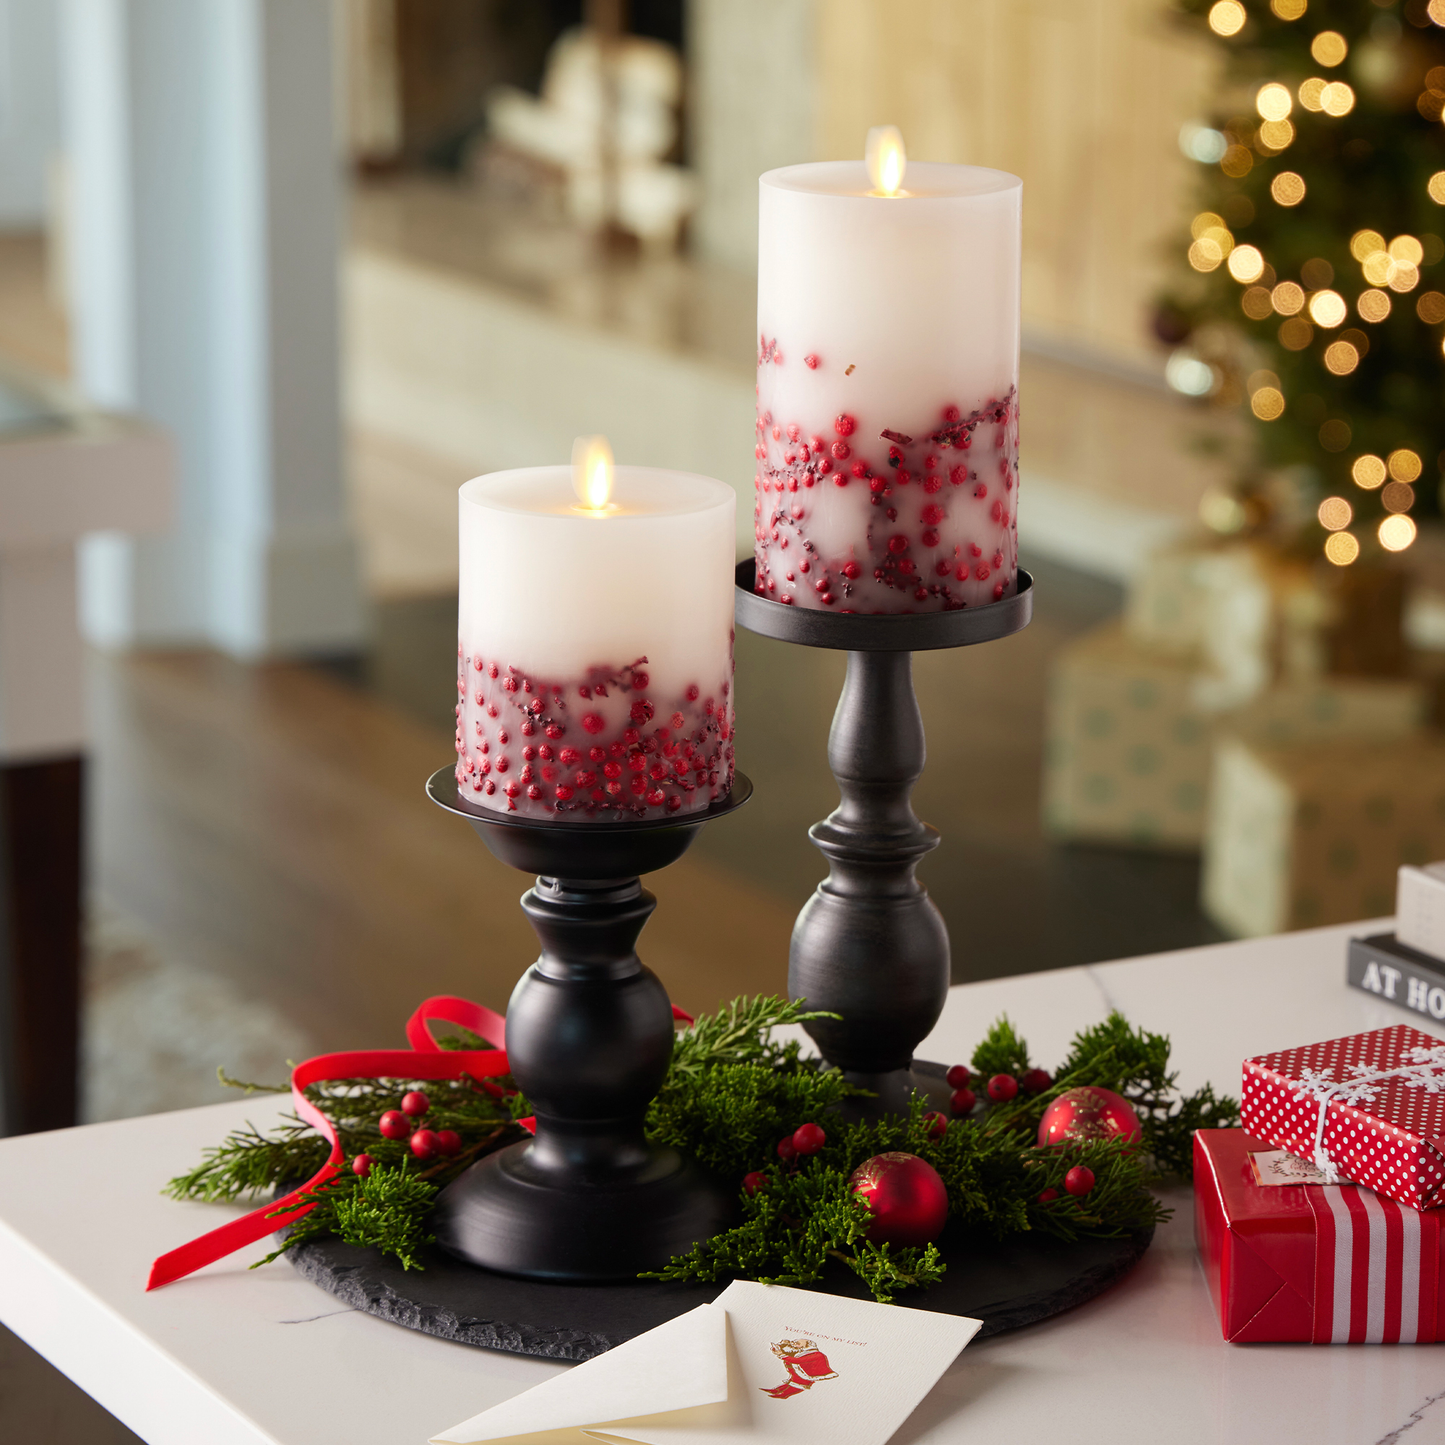 Embedded Red Berries Flameless Candle Pillar 